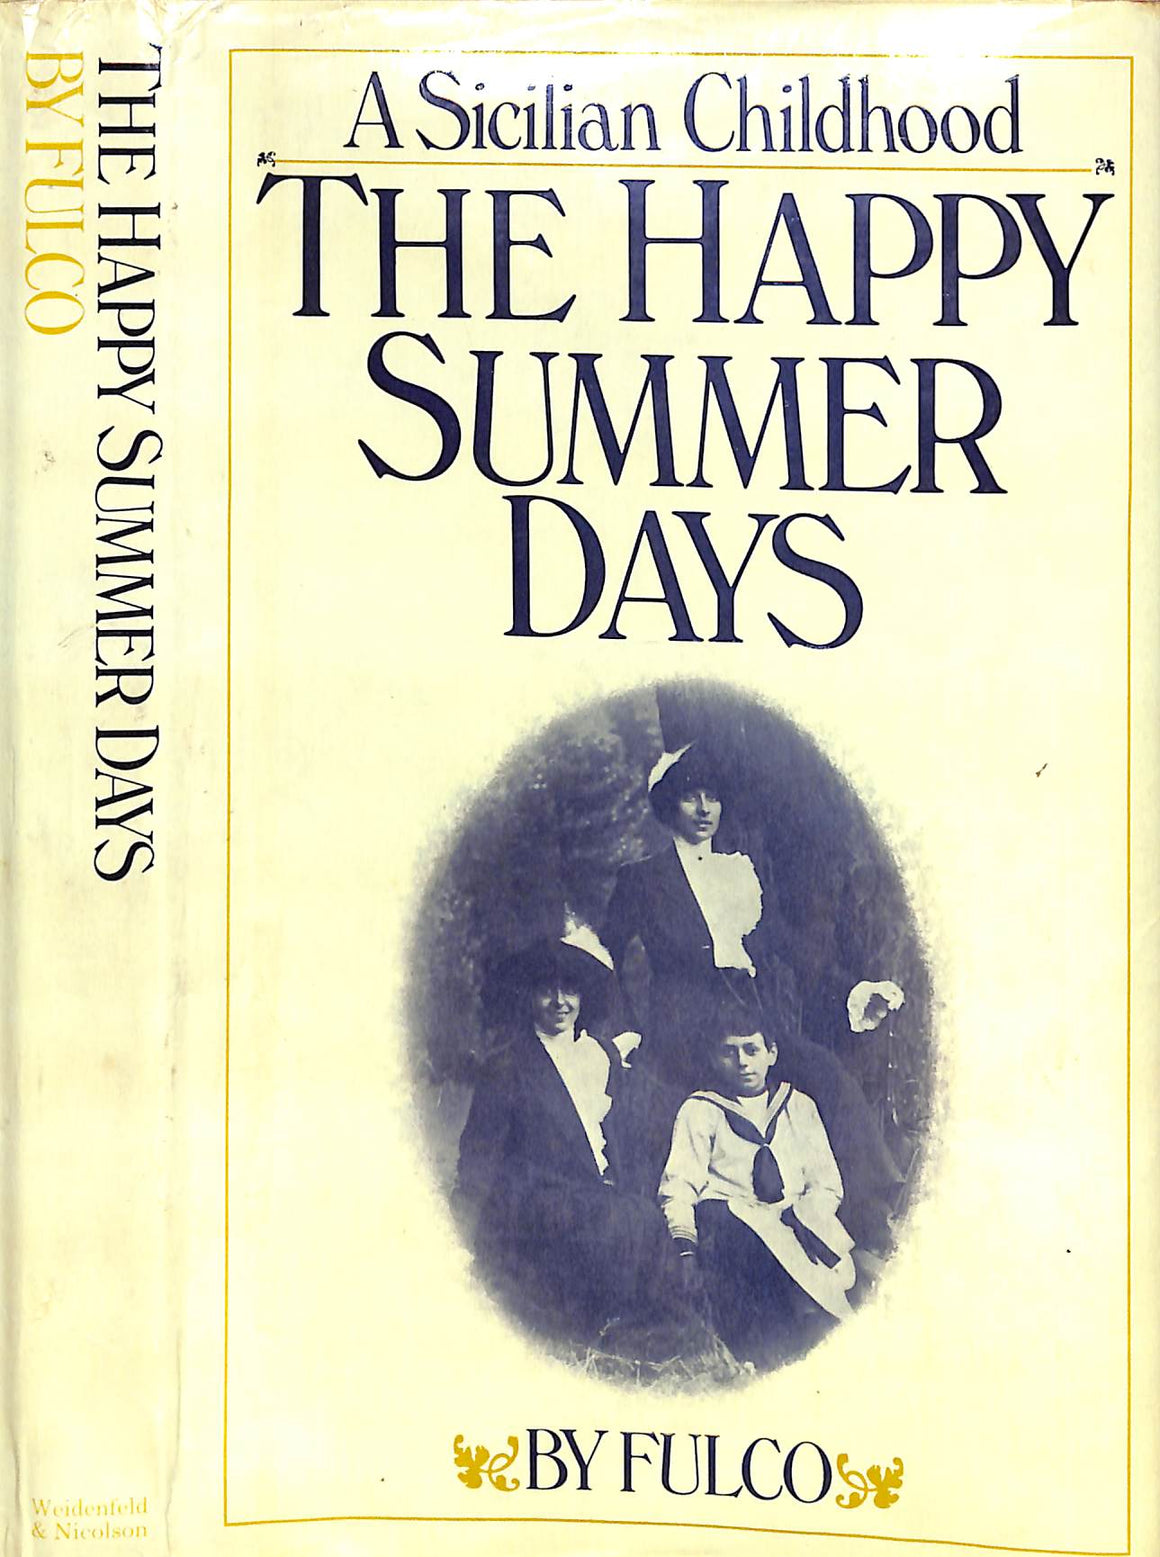 "The Happy Summer Days: A Sicilian Childhood" 1976 Fulco